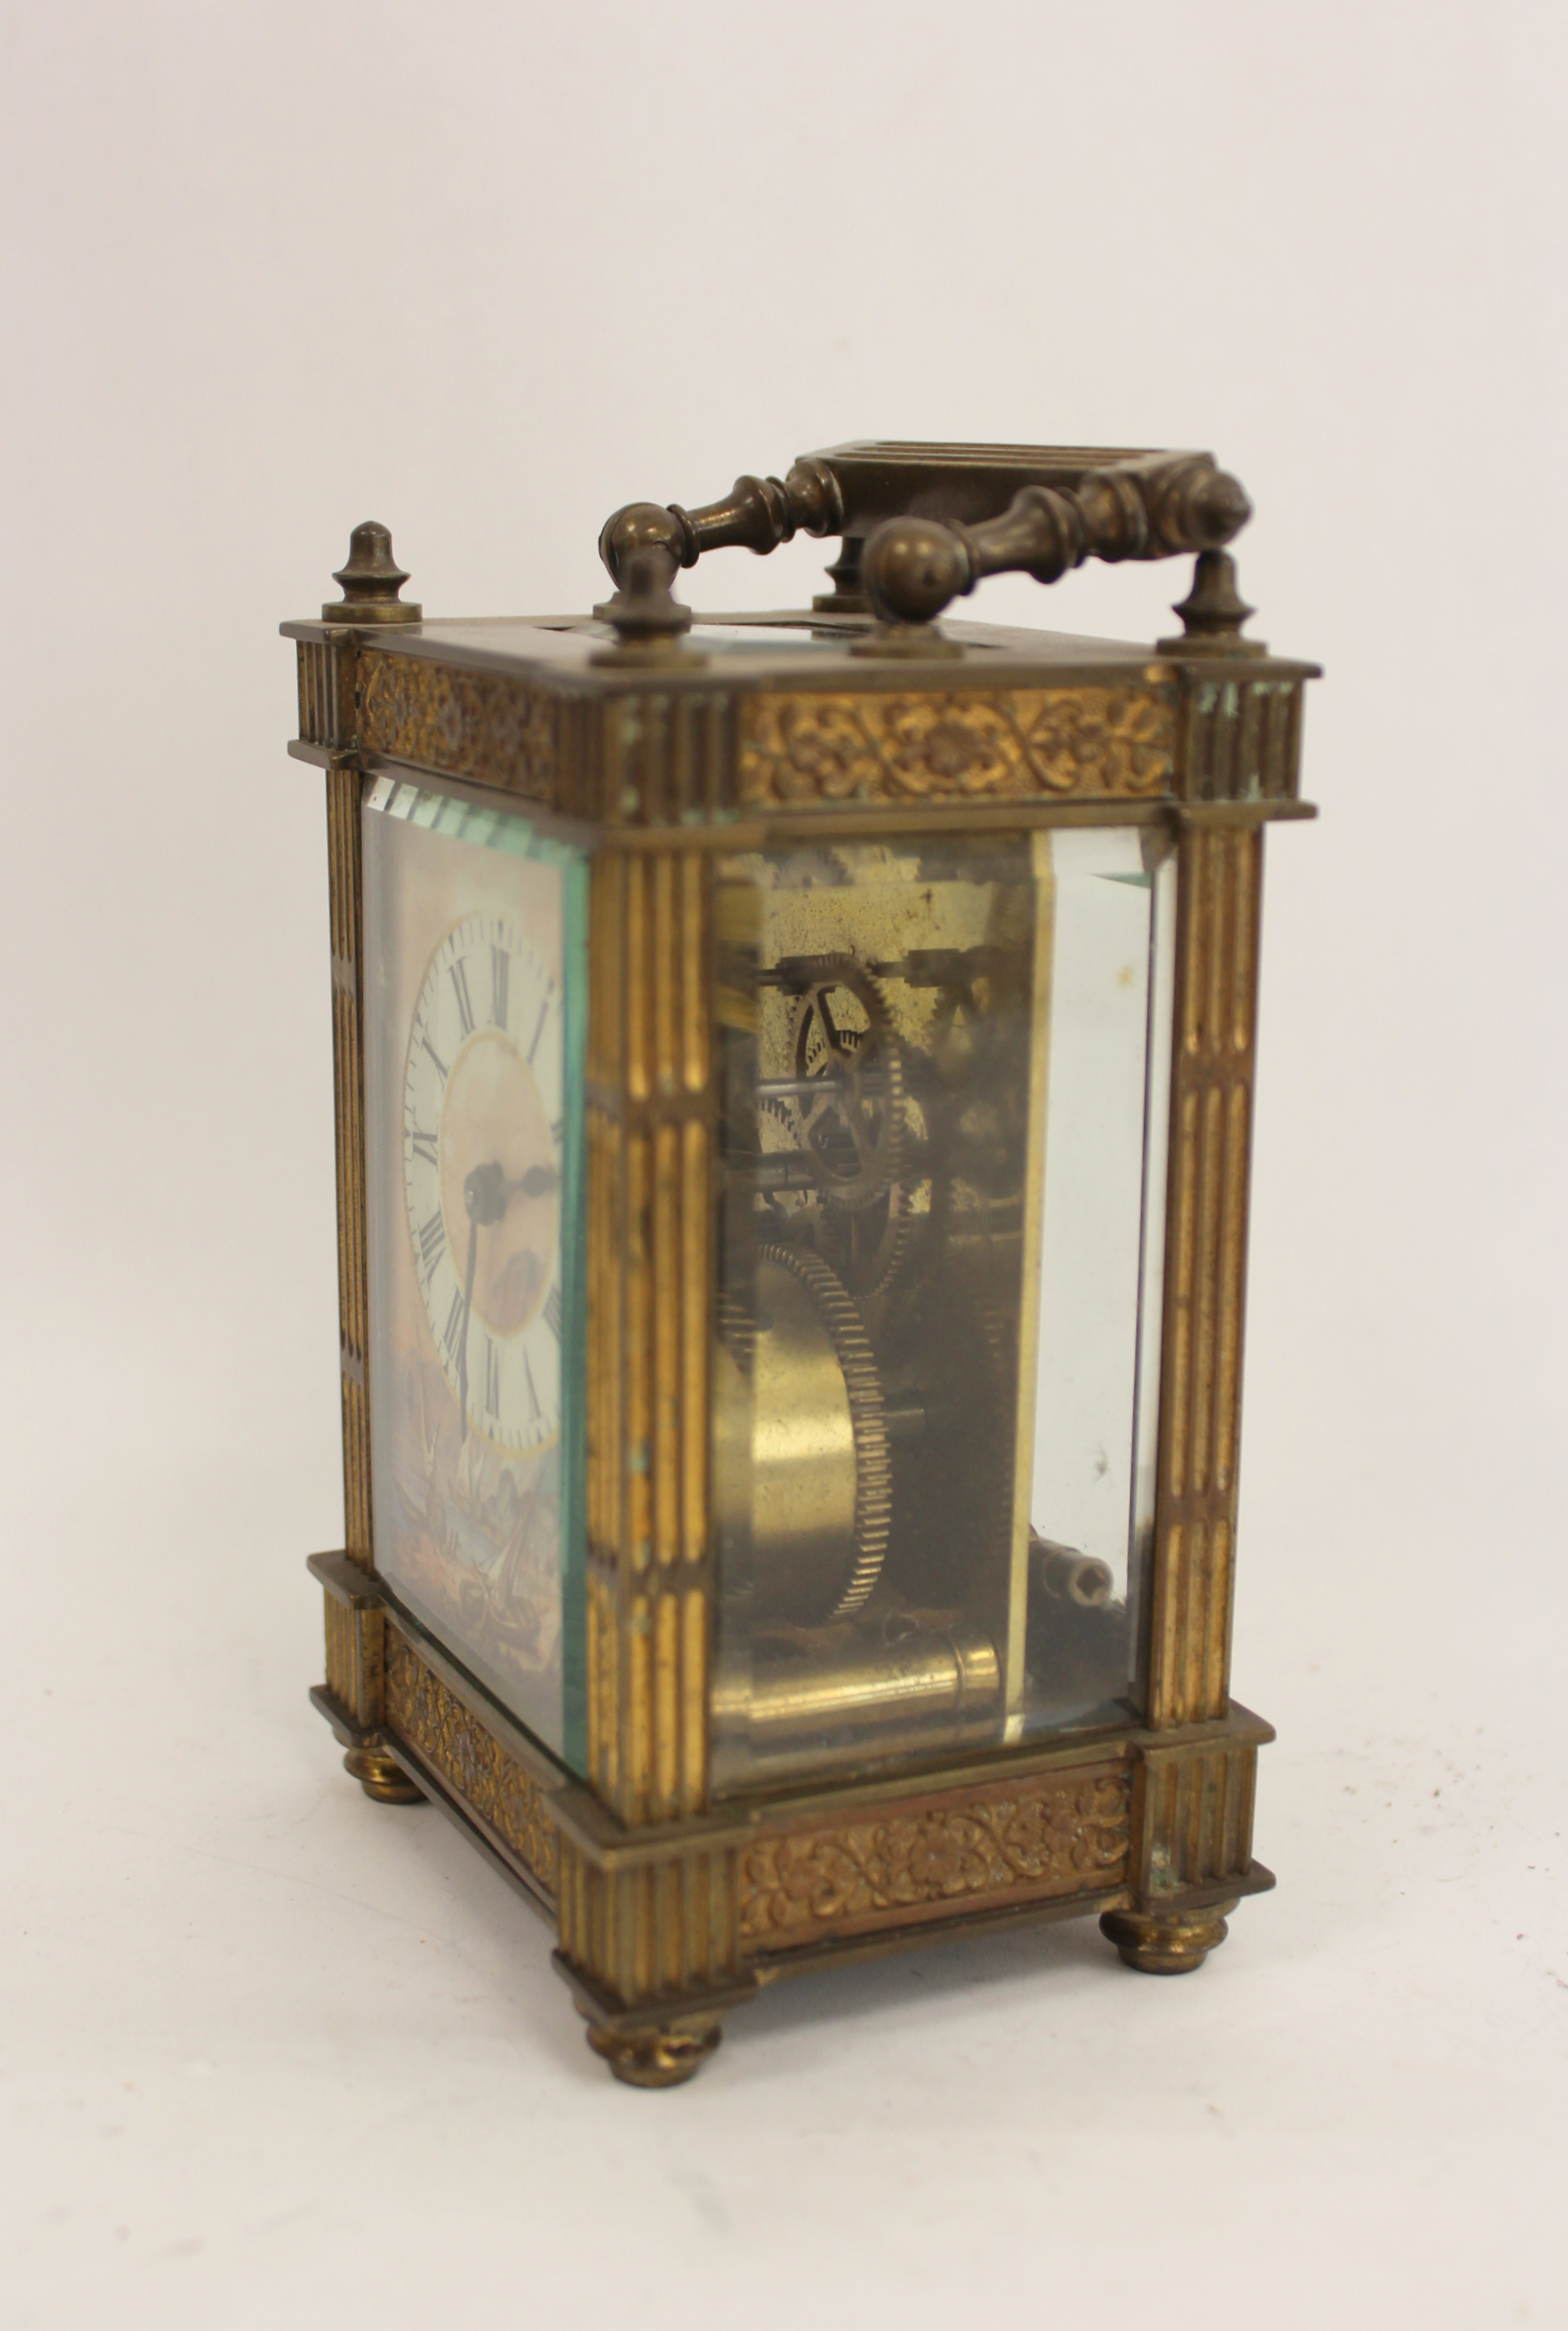 Cylinder carriage timepiece with painted and gilt porcelain dial depicting a coastal scene with - Image 3 of 5